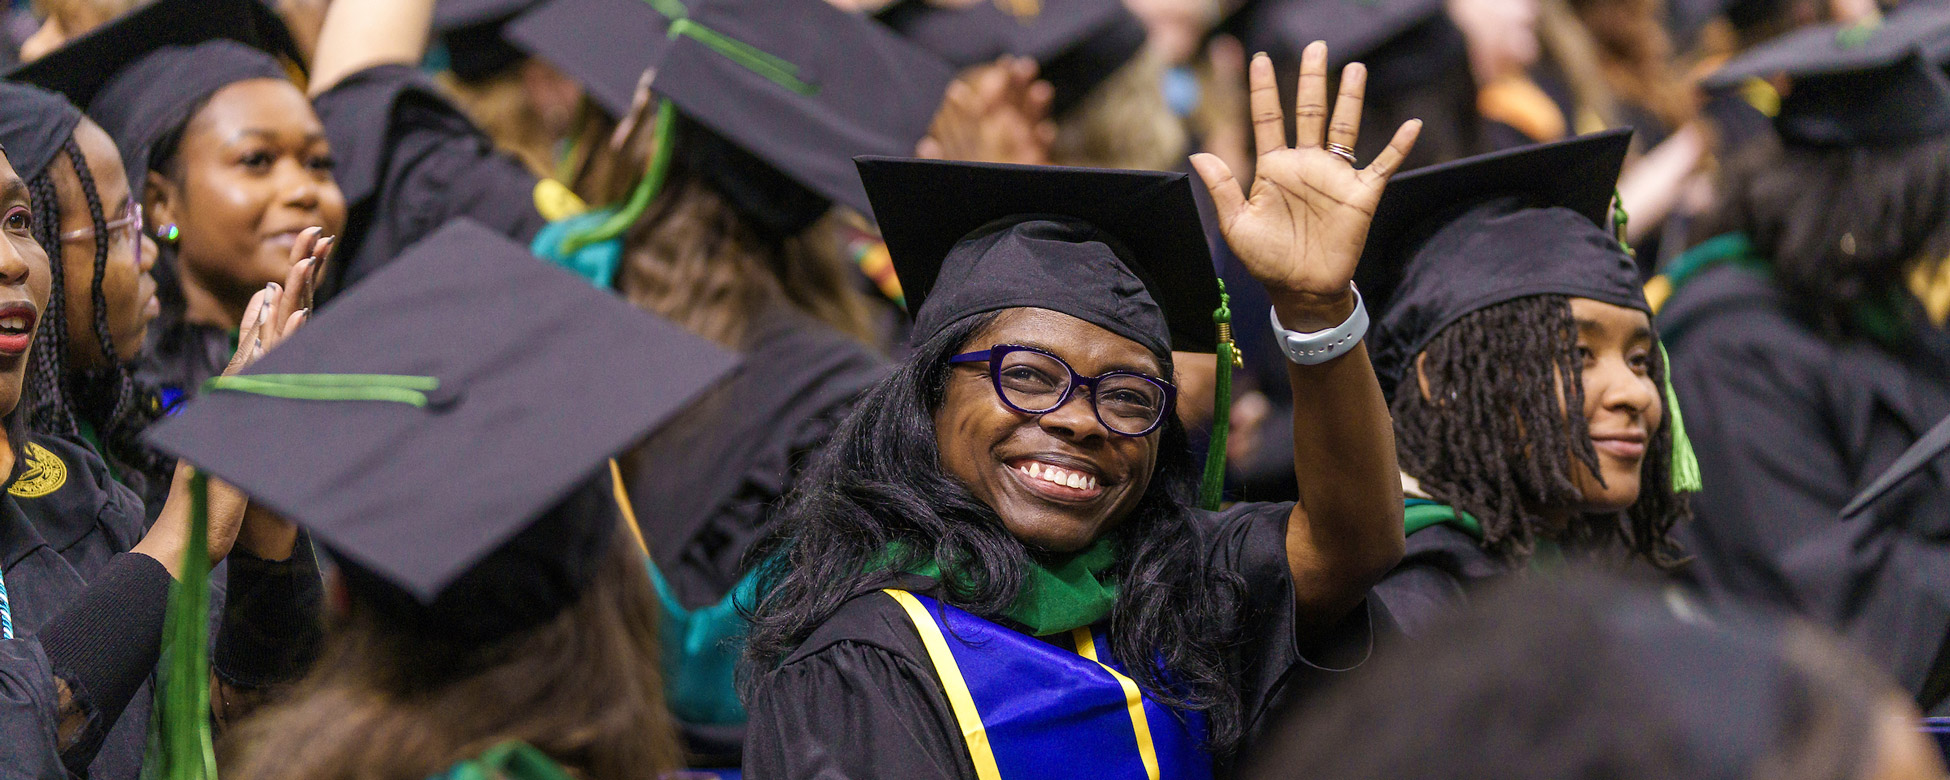 Student waves during the commencement ceremony